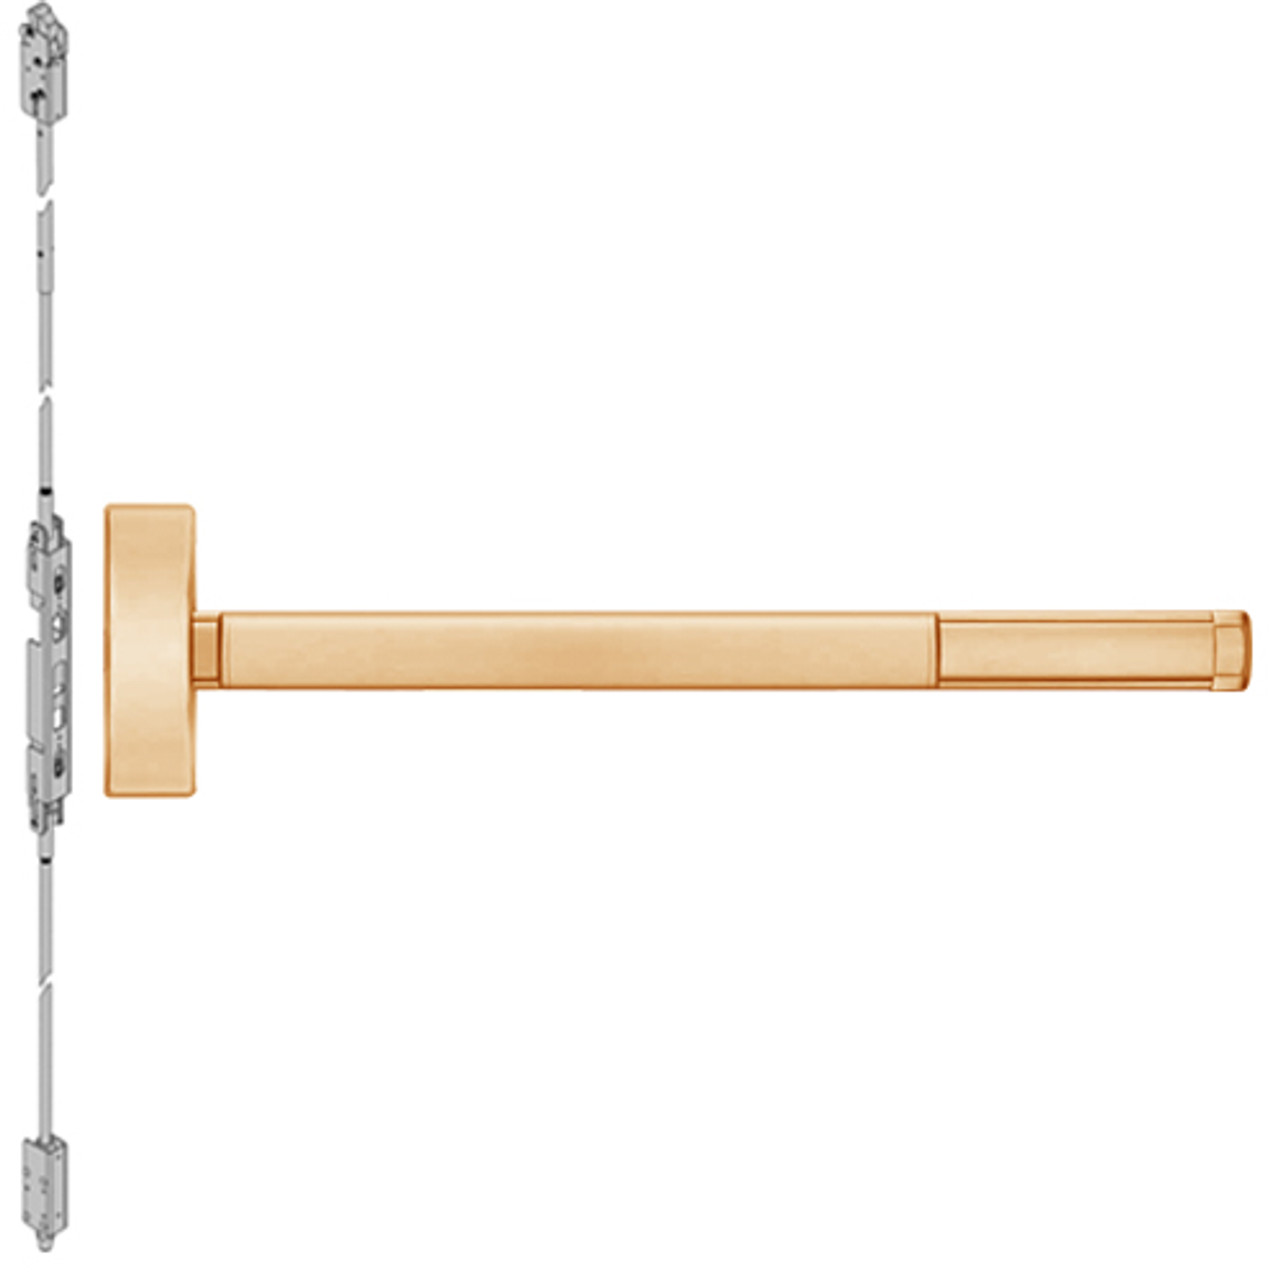 ELRFL2802LBR-612-36 PHI 2800 Series Fire Rated Concealed Vertical Rod Exit Device with Electric Latch Retraction Prepped for Dummy Trim in Satin Bronze Finish